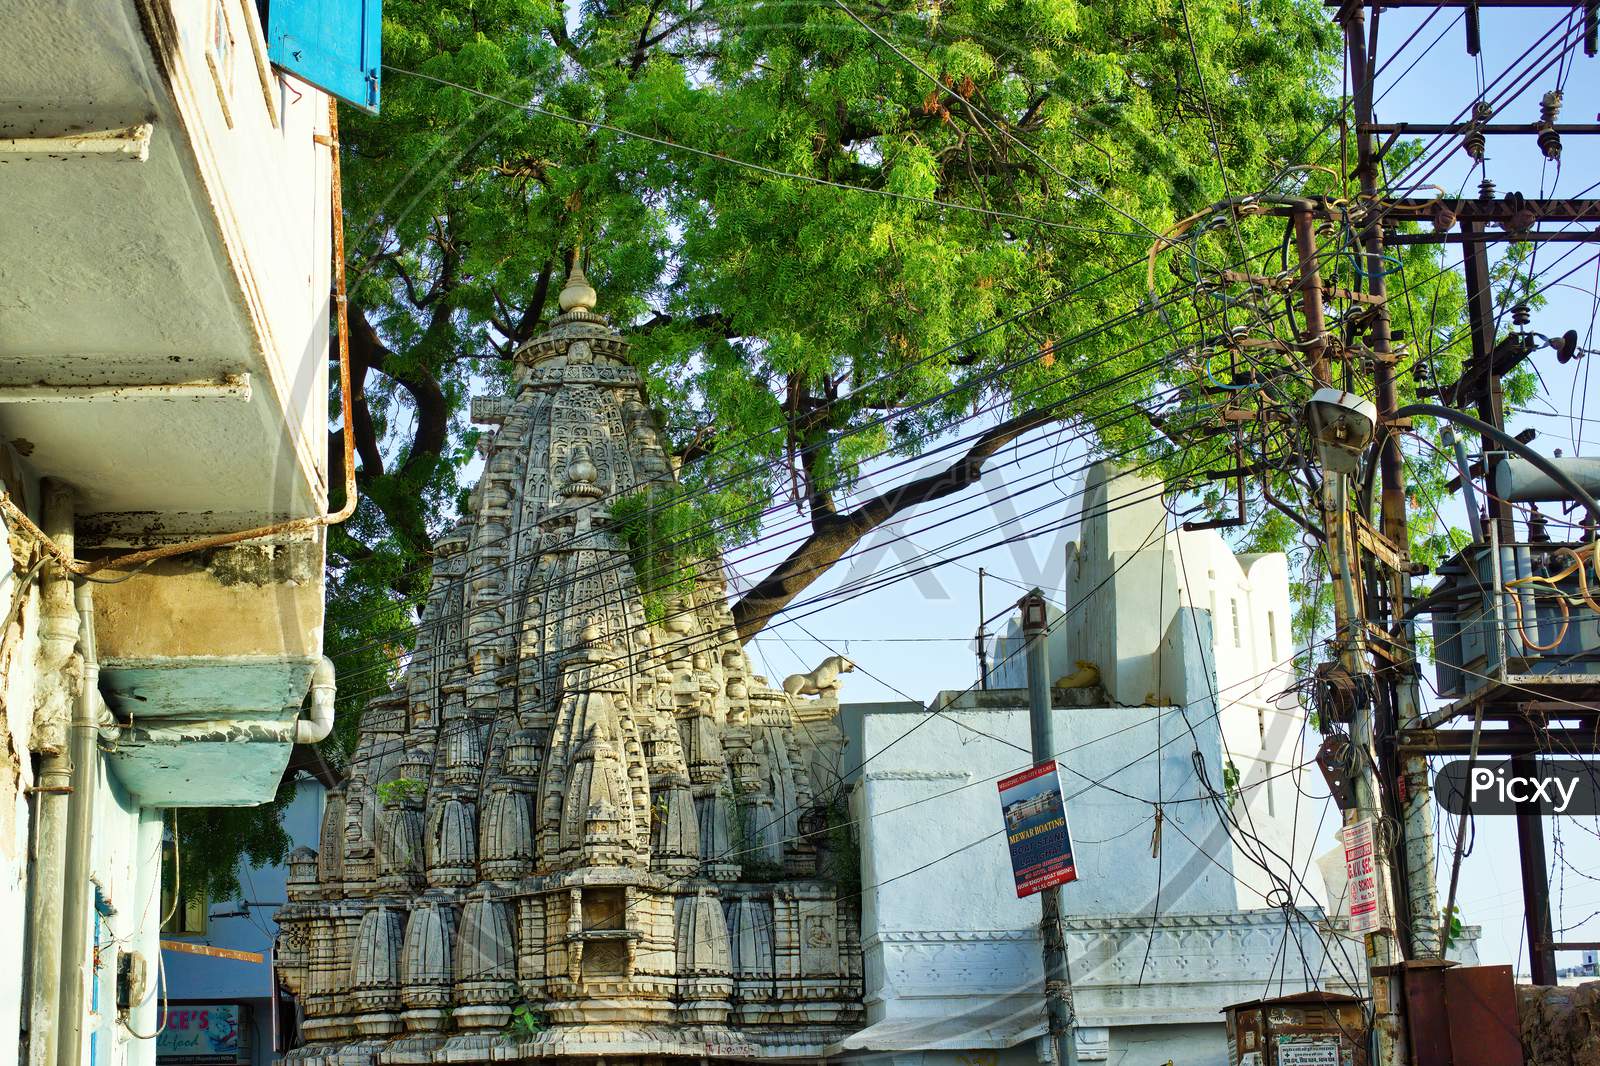 Udaipur, India - May 24, 2013: Electric Circuits And Wires Before Hindu Temple Located In Rajasthan State